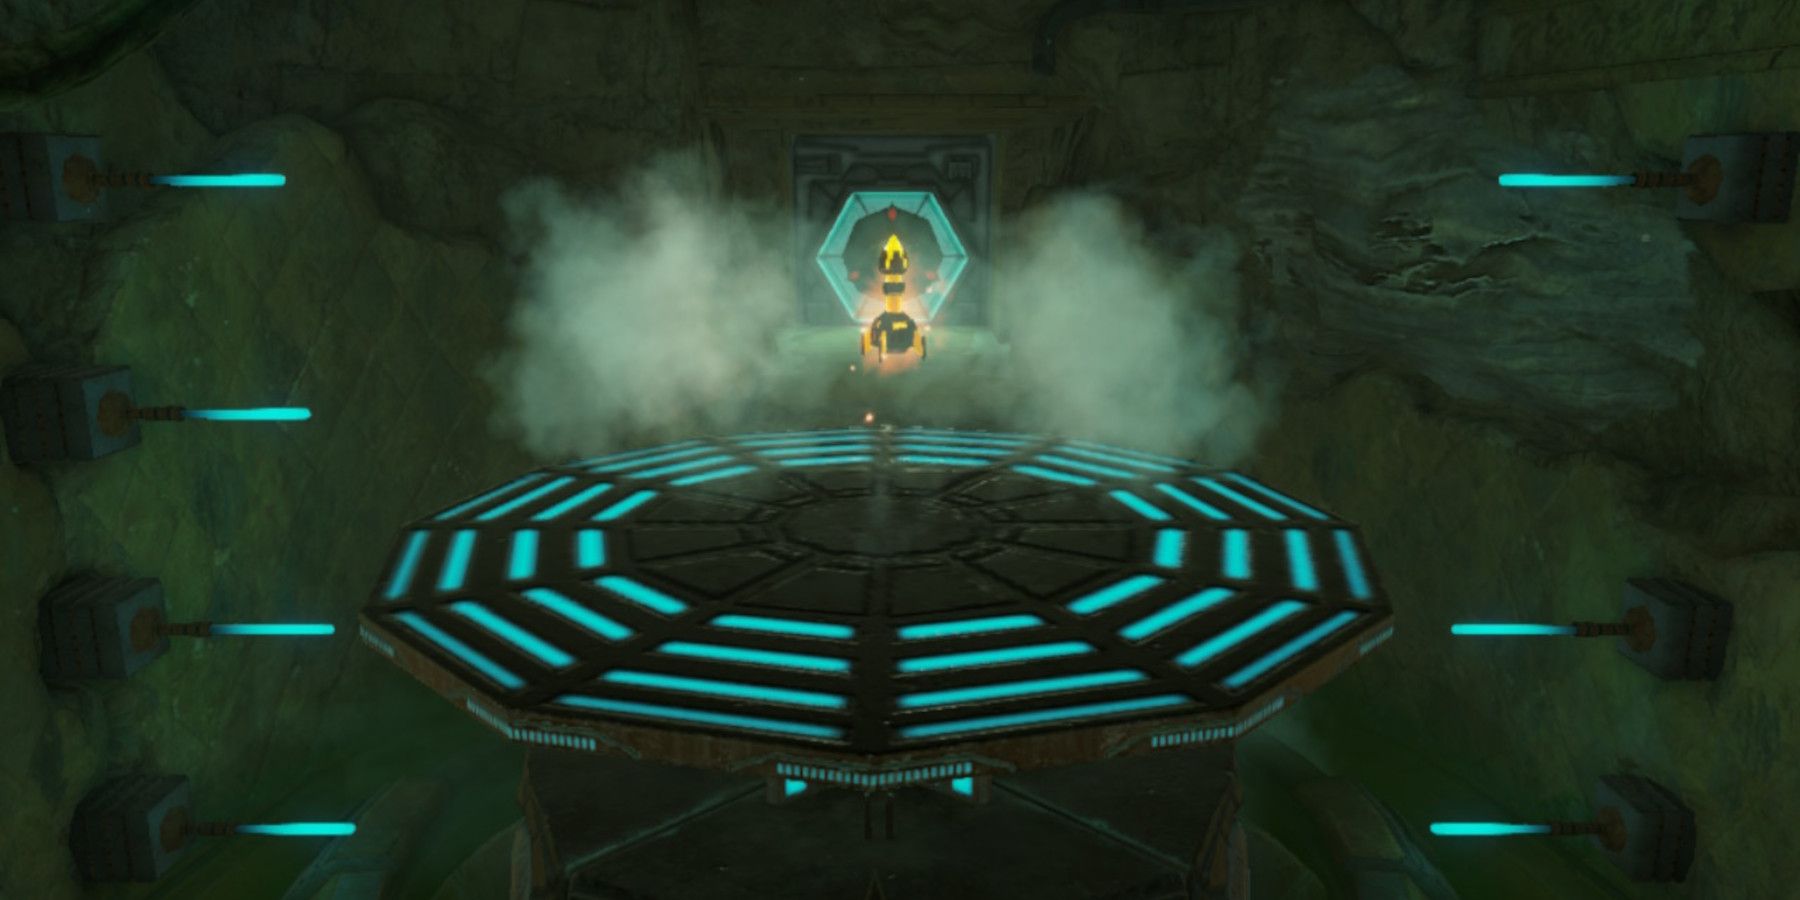 metroid prime remastered missile power bomb expansion locations